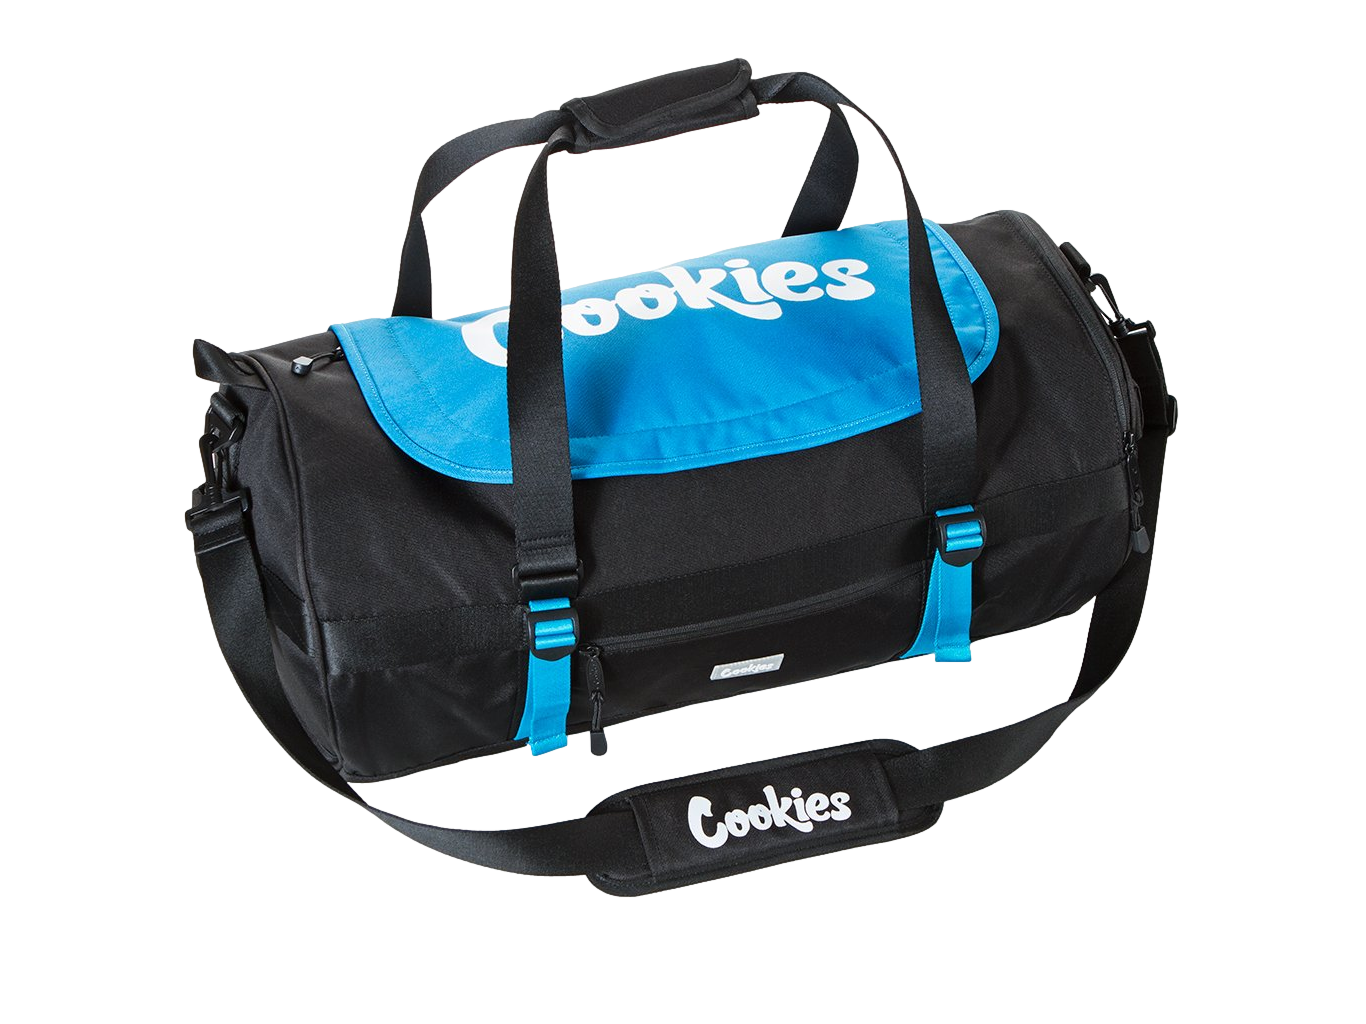 Cookies Parks Utility Smell Proof Duffle Bag